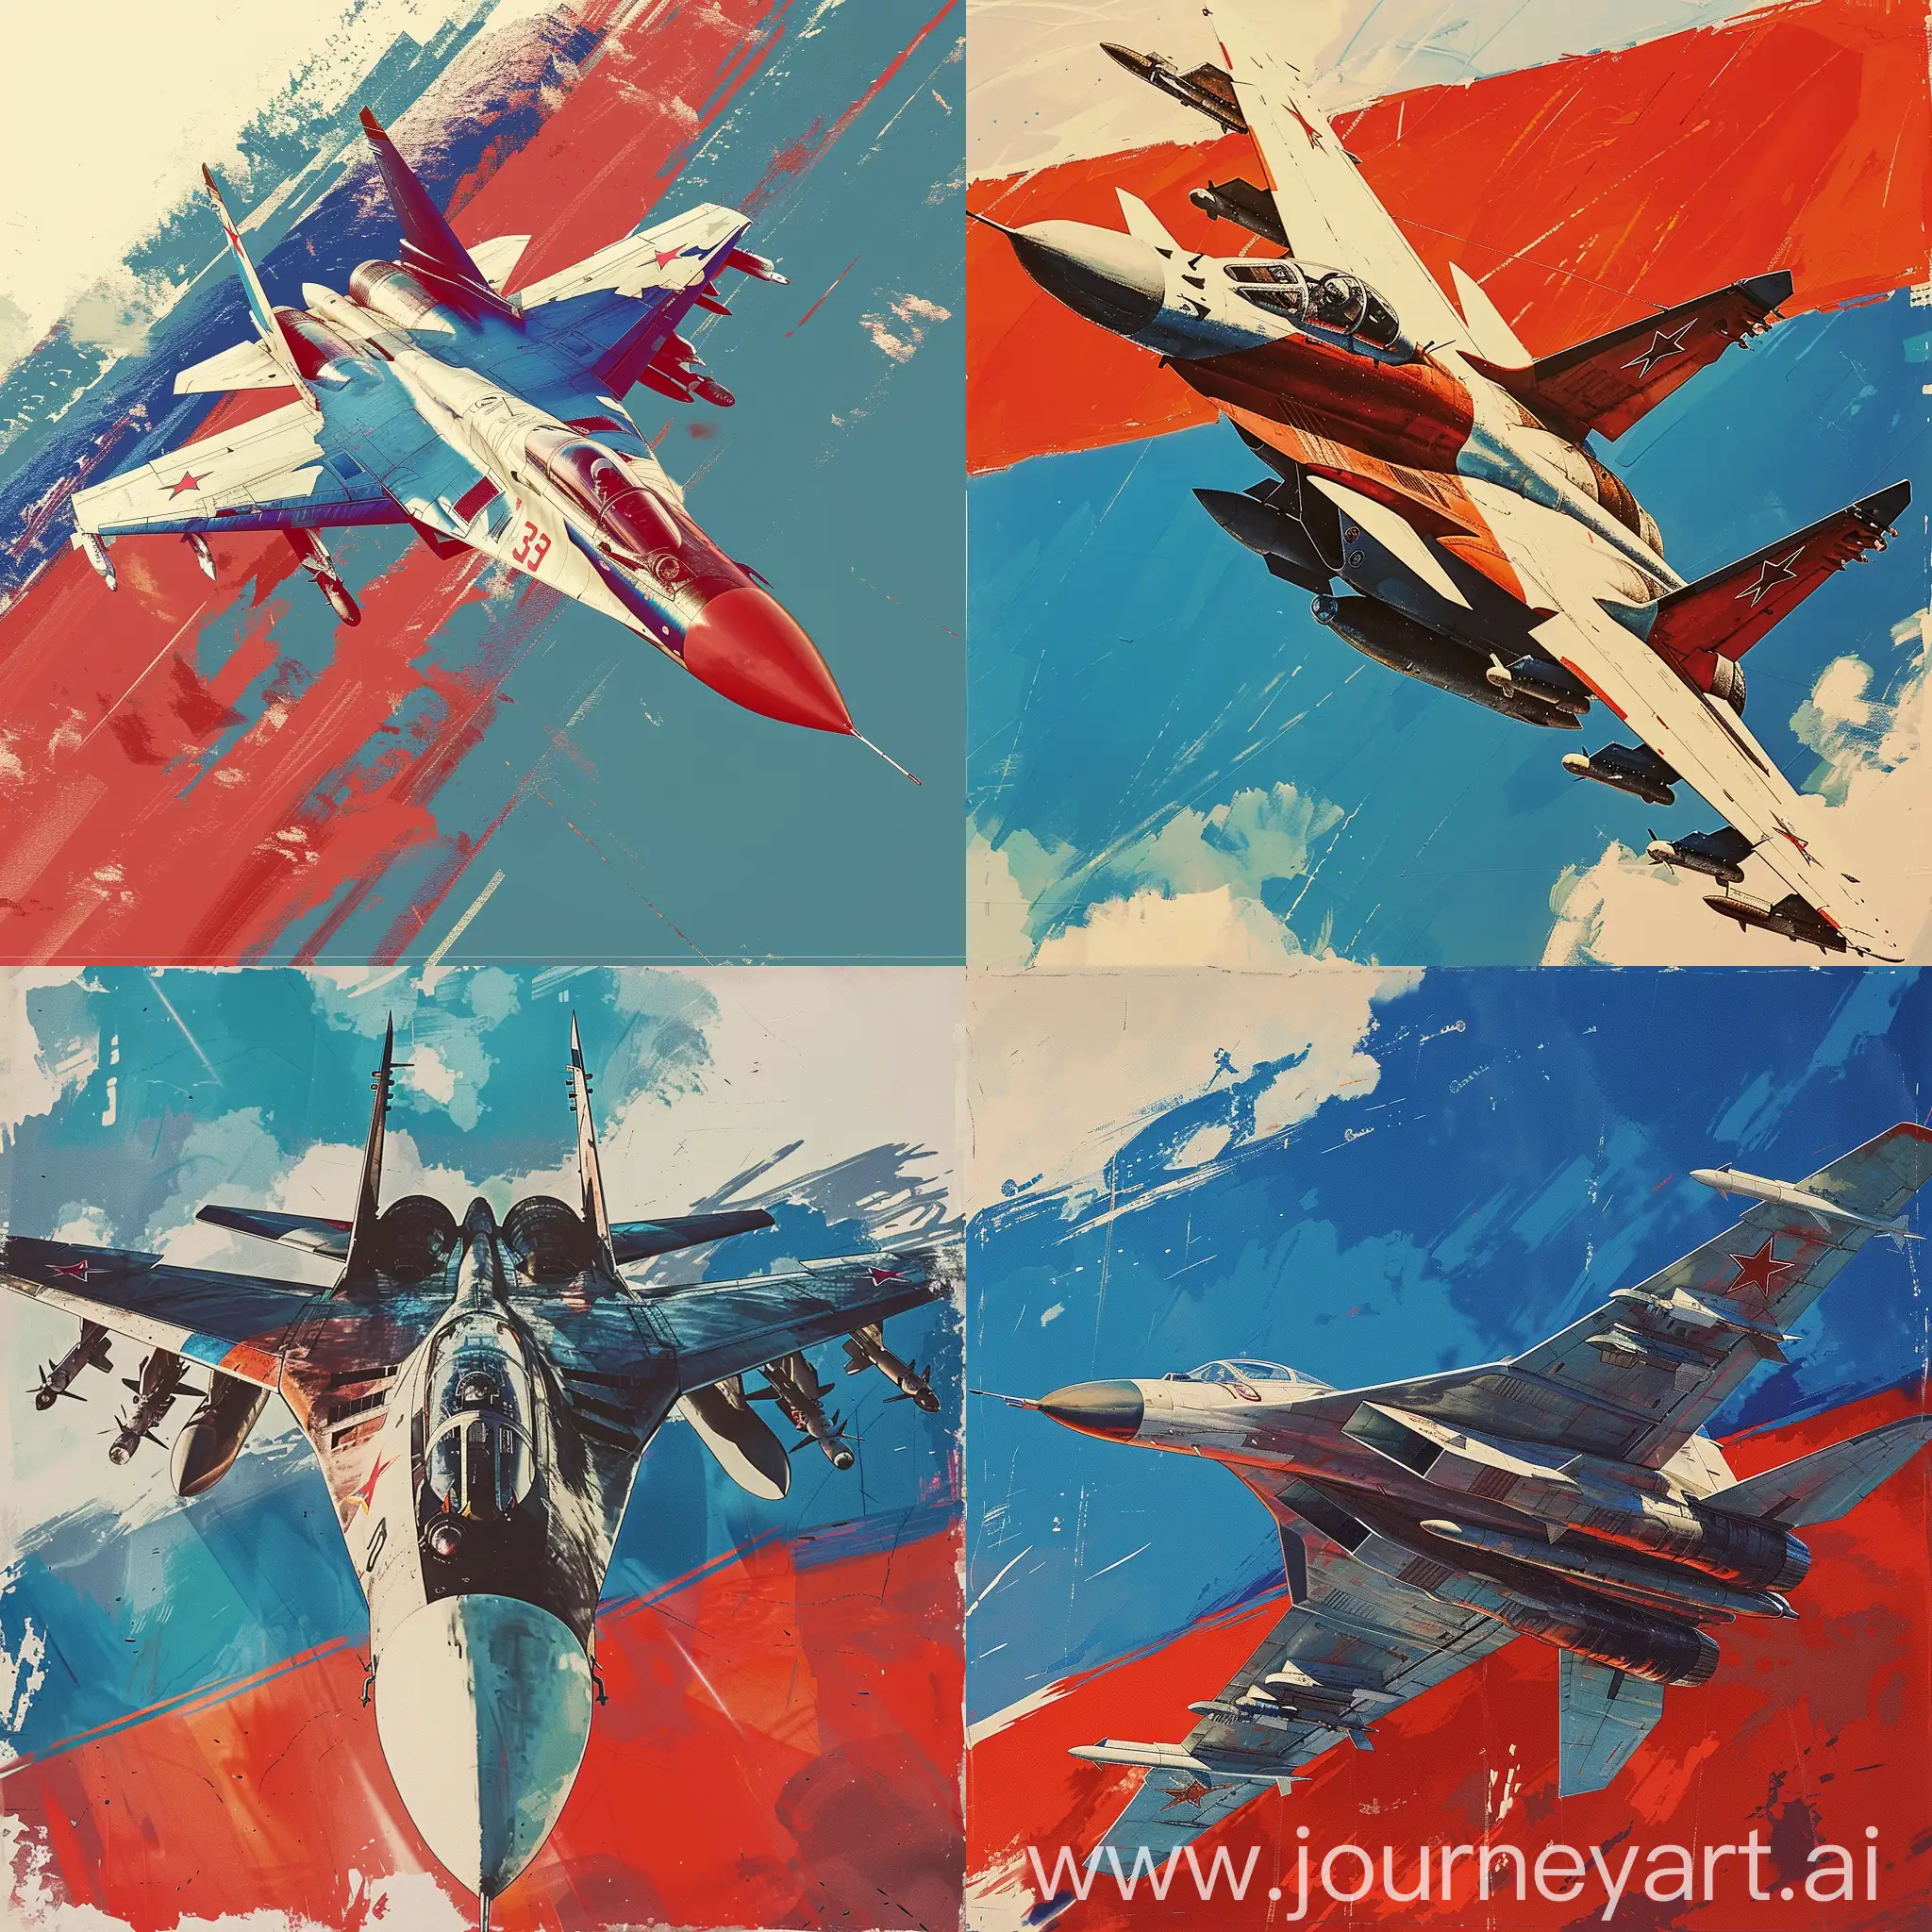 Modern Russian Mig-29 aircraft, cool weapons, sky in the color of the Russian flag, in the style of a Soviet postcard, epic